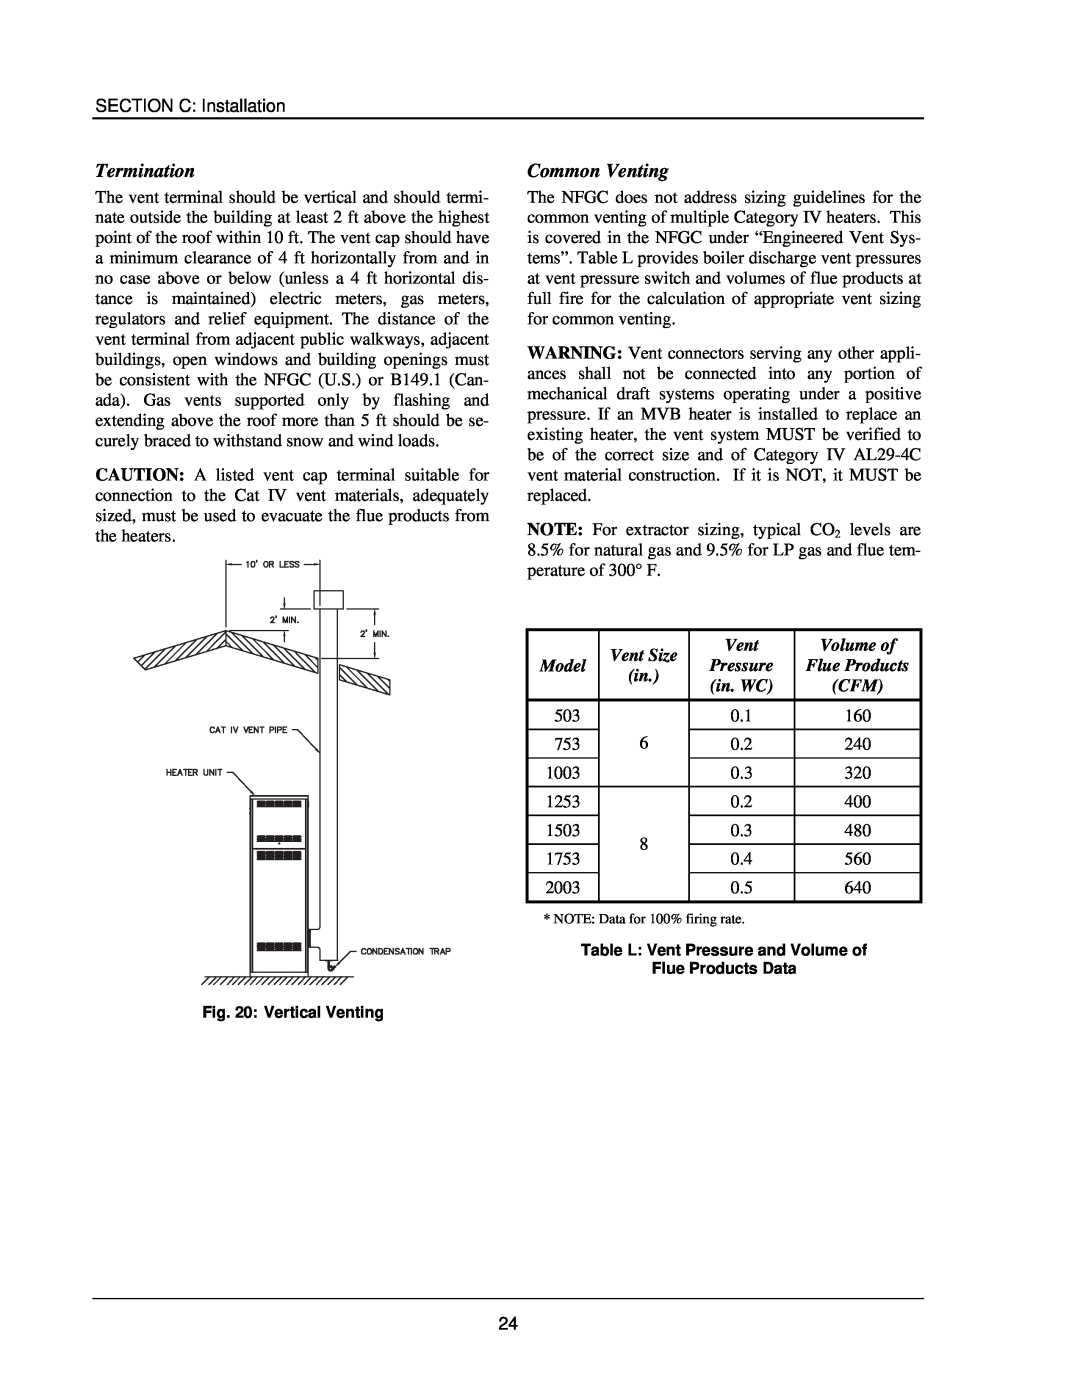 Raypak 503-2003 manual Termination, Common Venting, Vent Size, Volume of, Model, Pressure, Flue Products, in. WC 